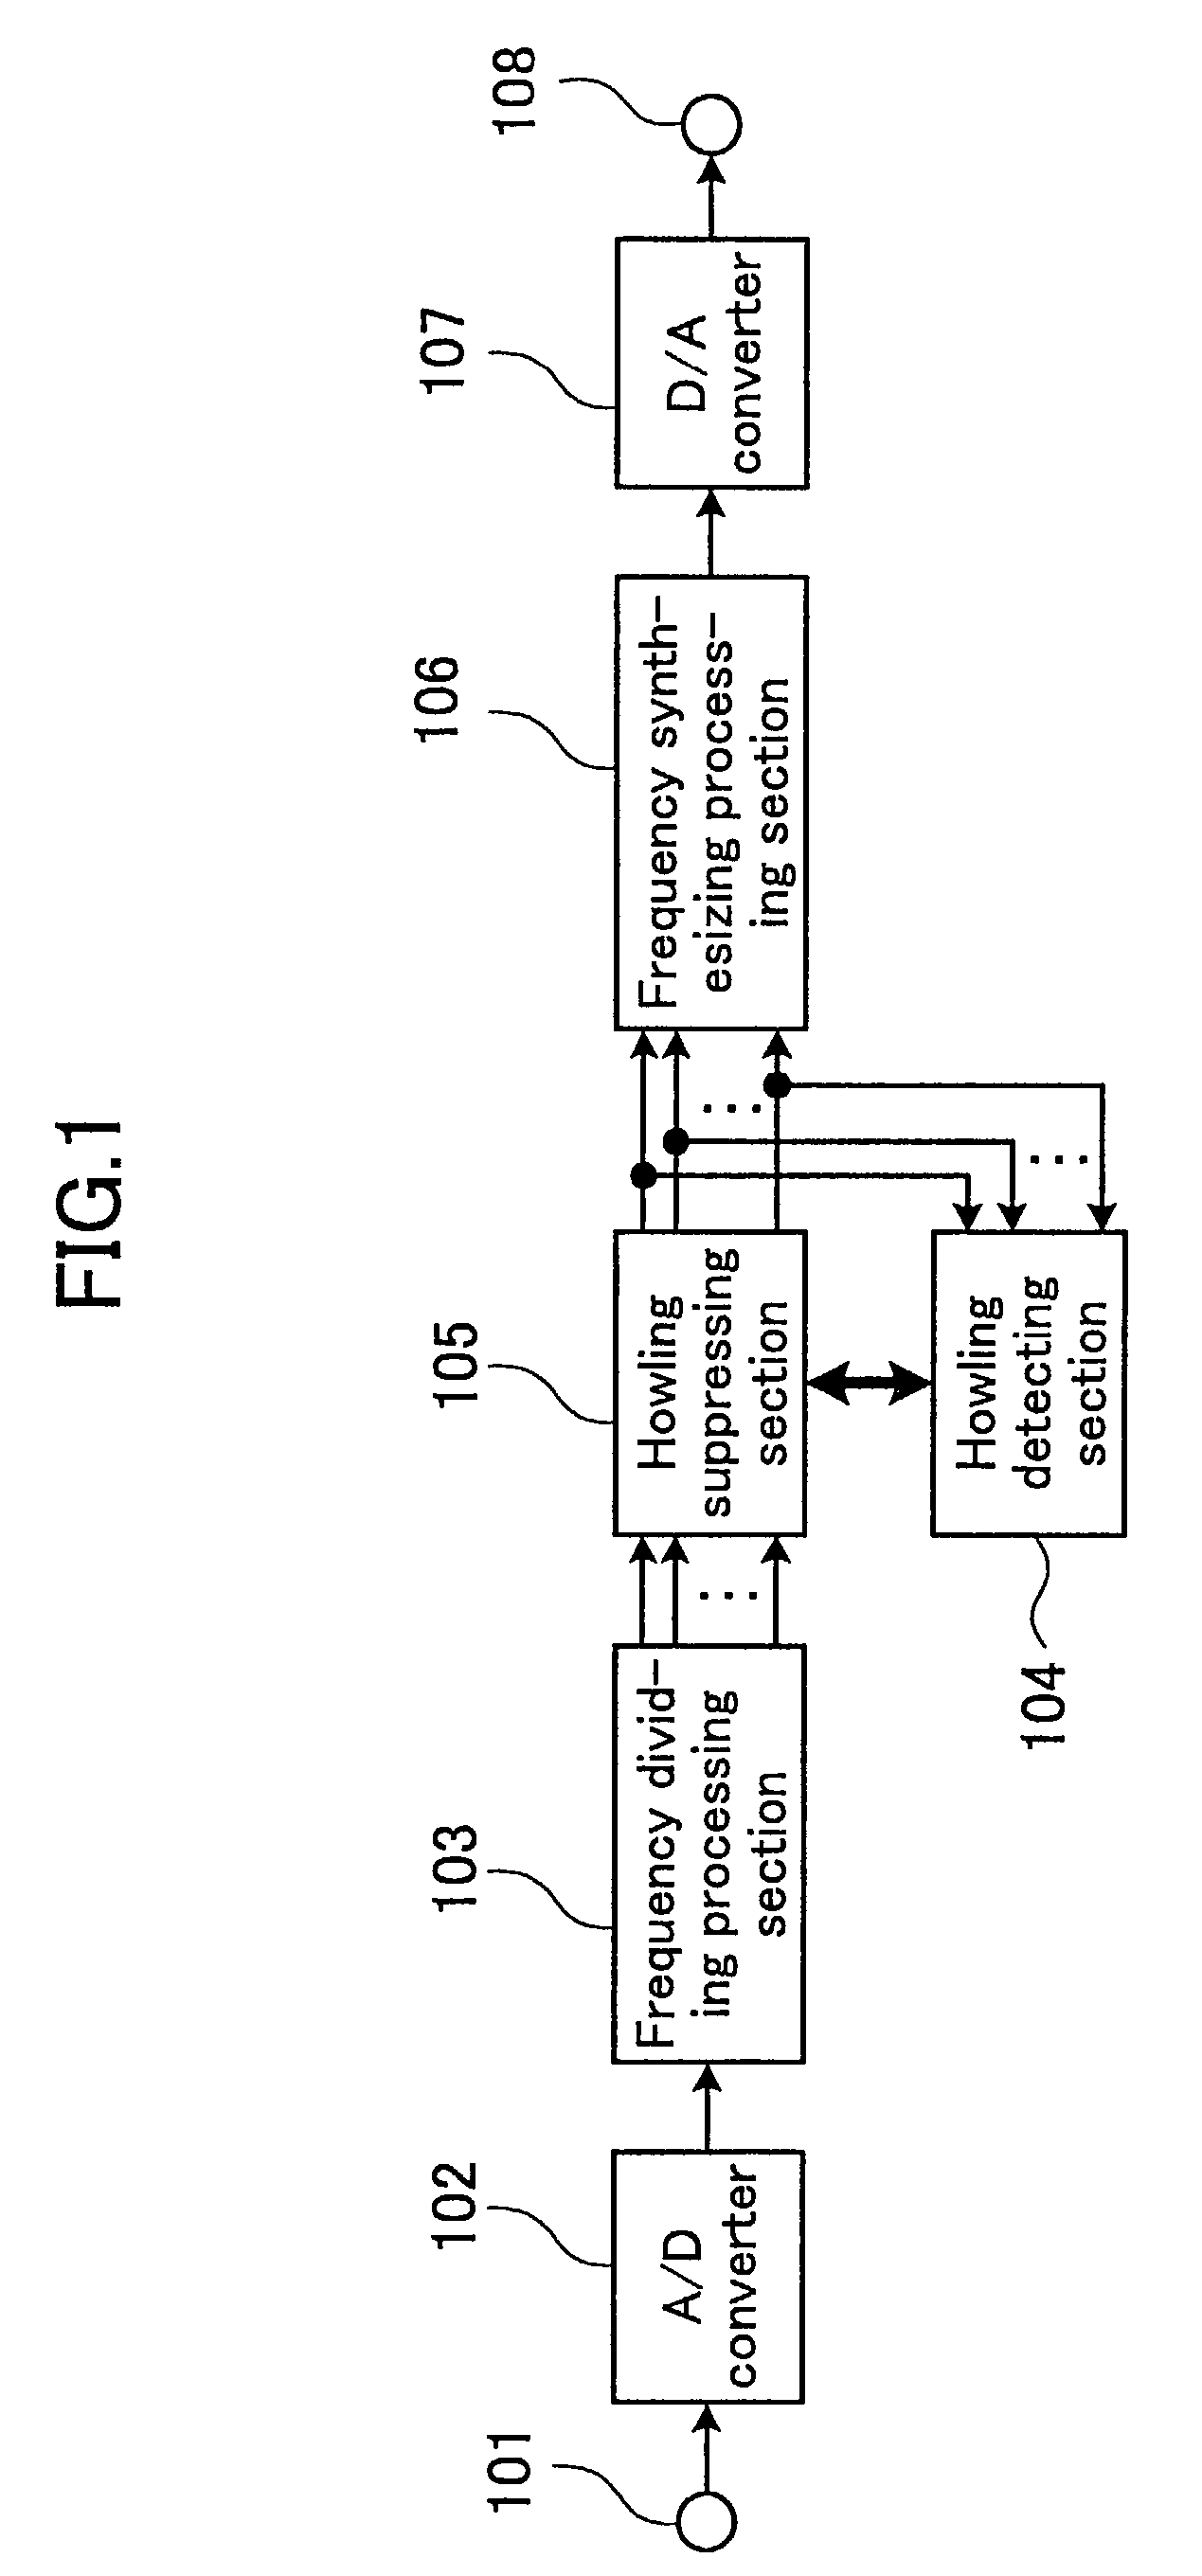 Howling detecting and suppressing apparatus, method and computer program product